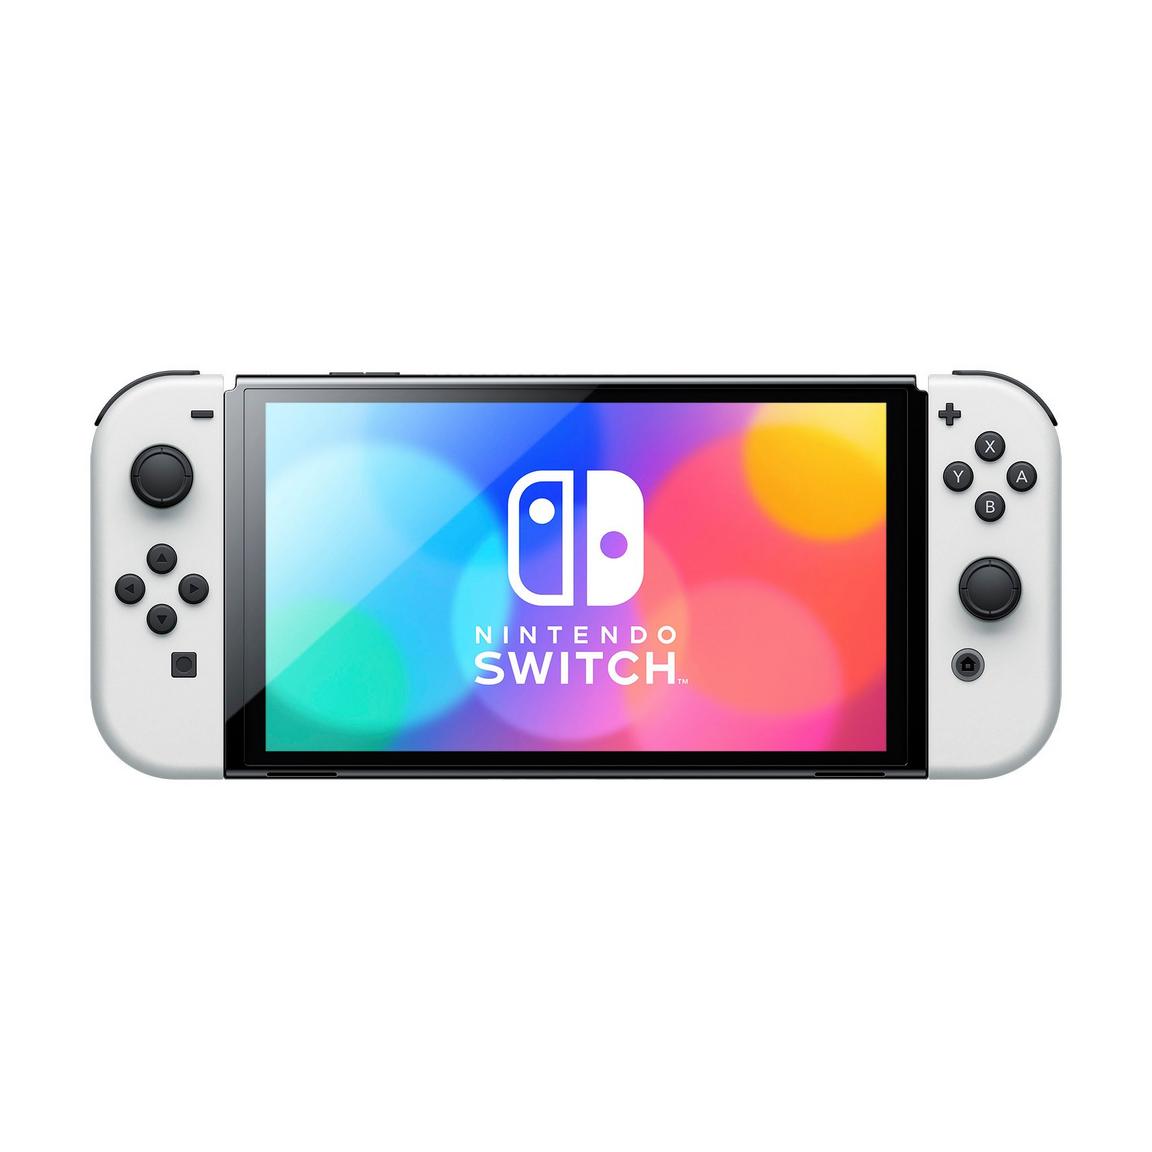 Nintendo Switch OLED with White Joy-Con $349.99 at Gamestop